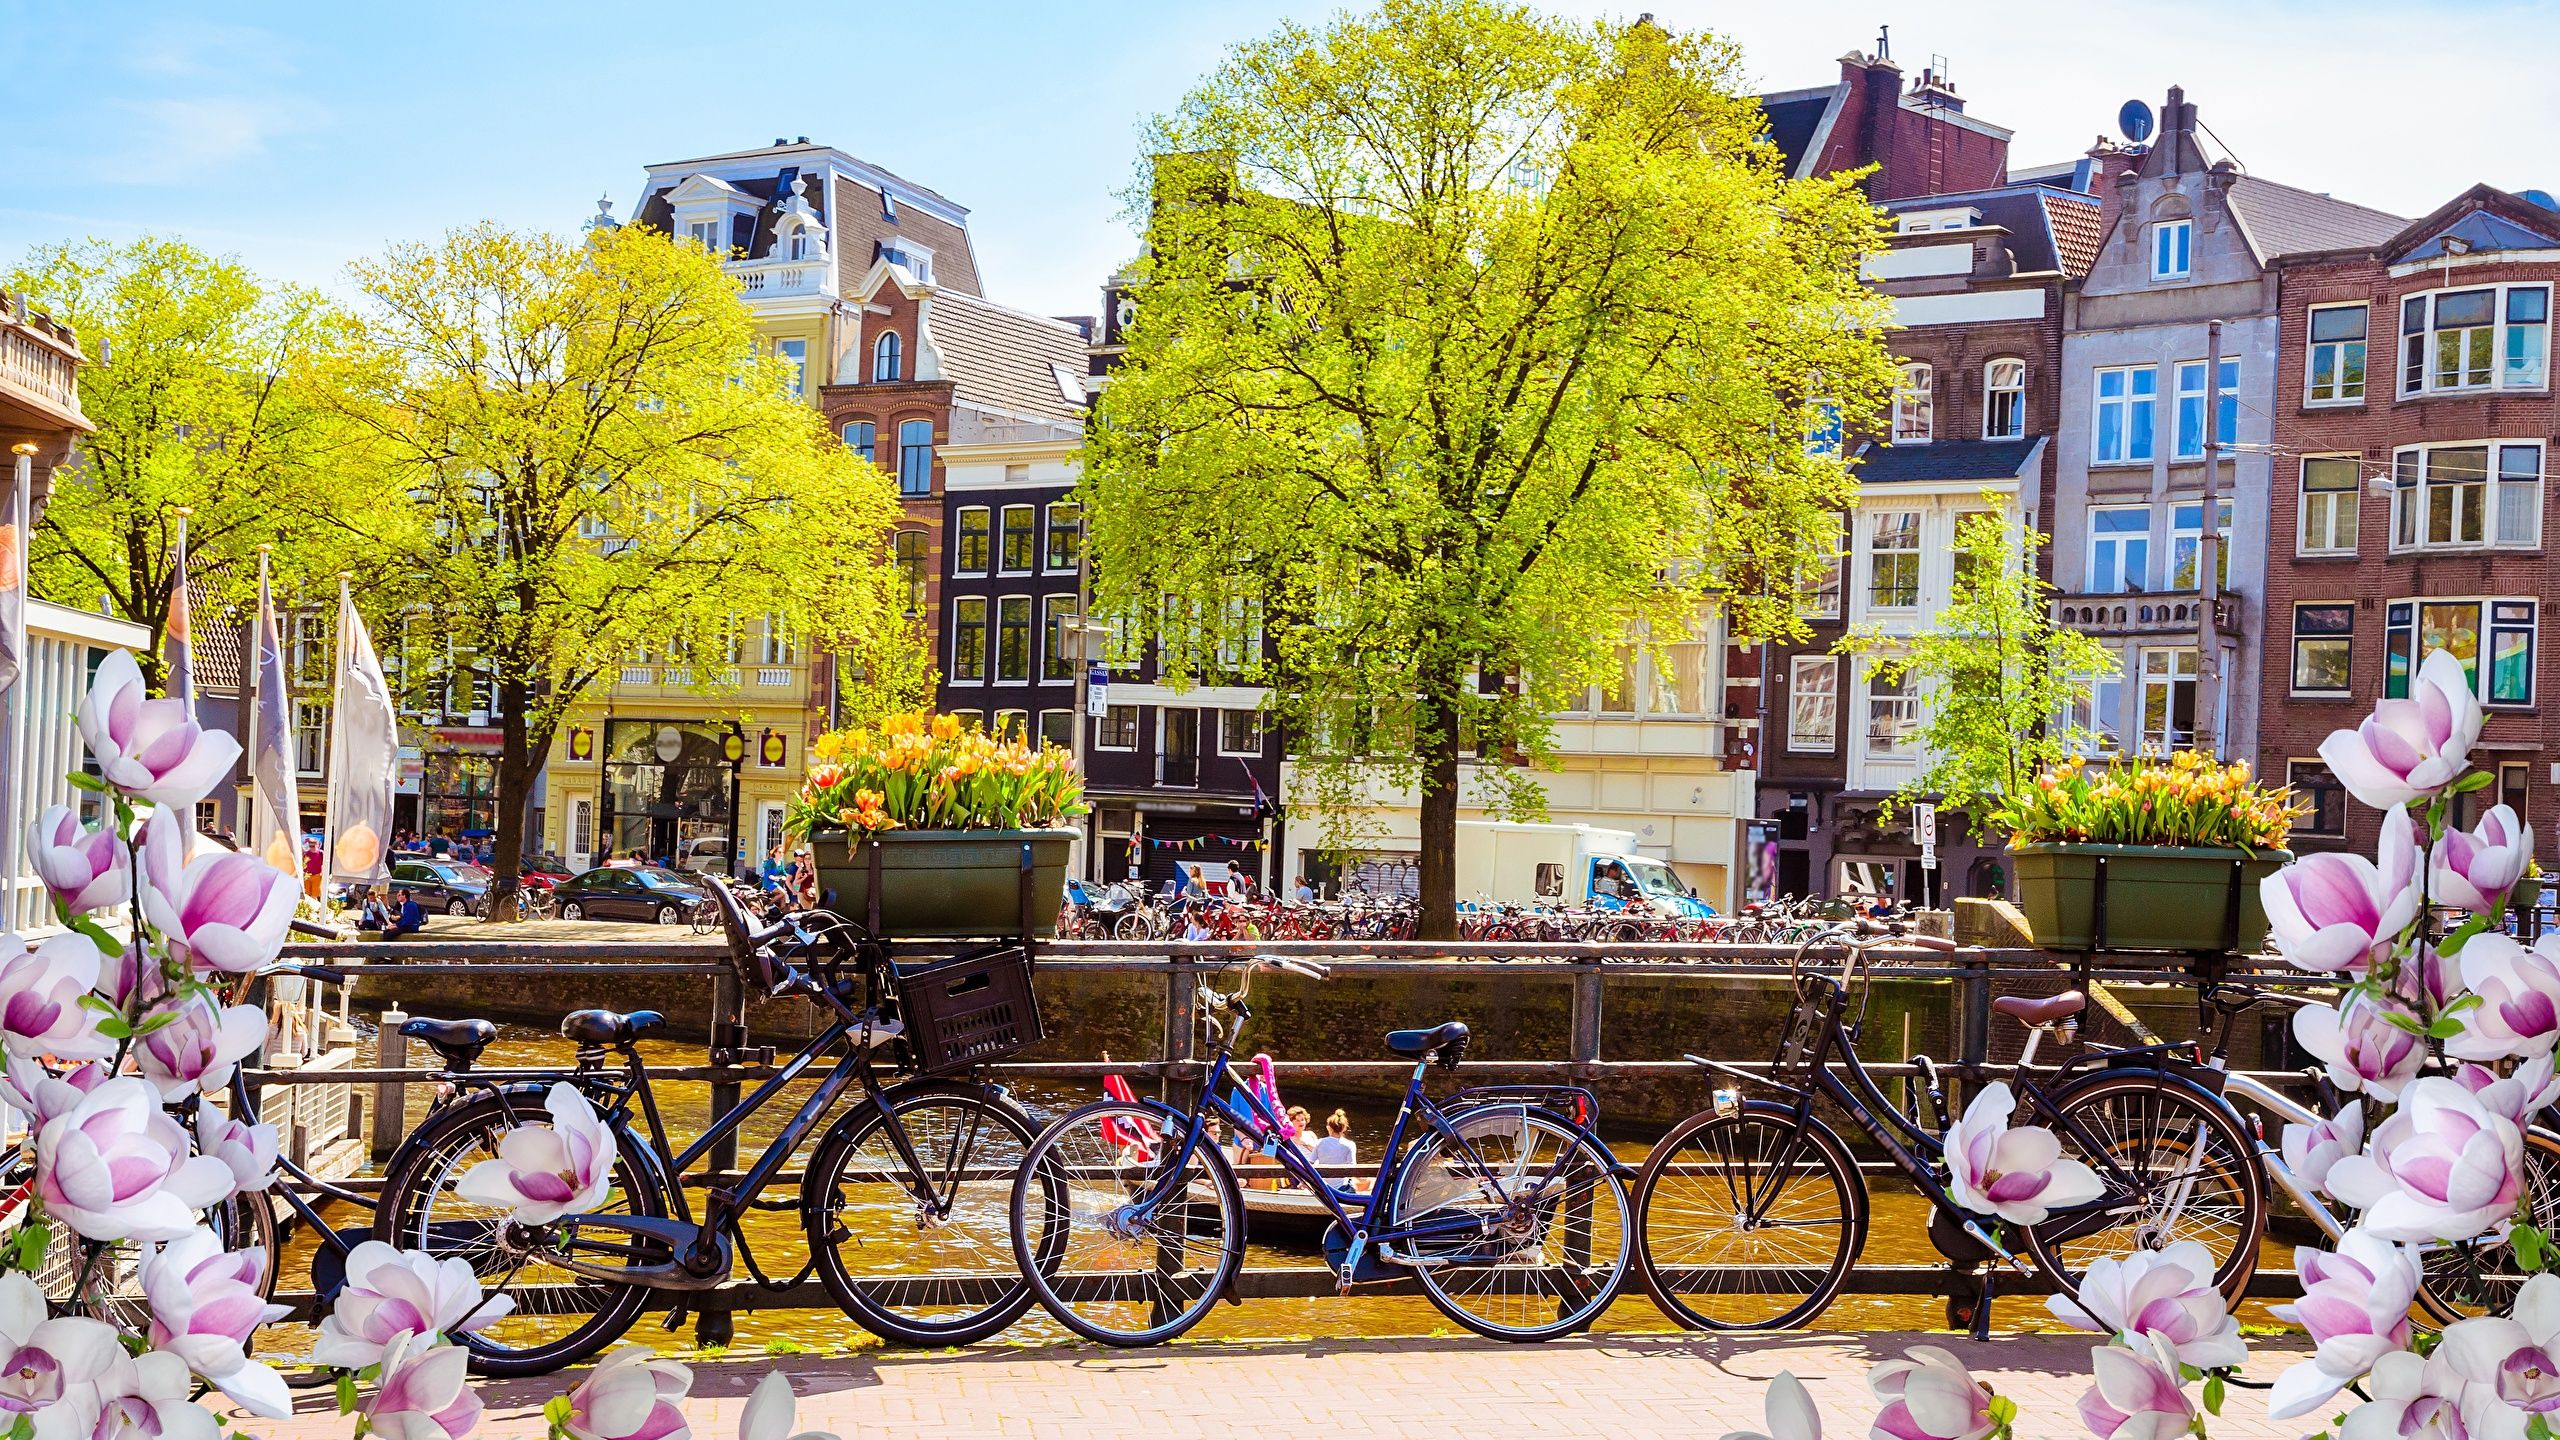 image Amsterdam Netherlands bicycles Spring Cities 2560x1440